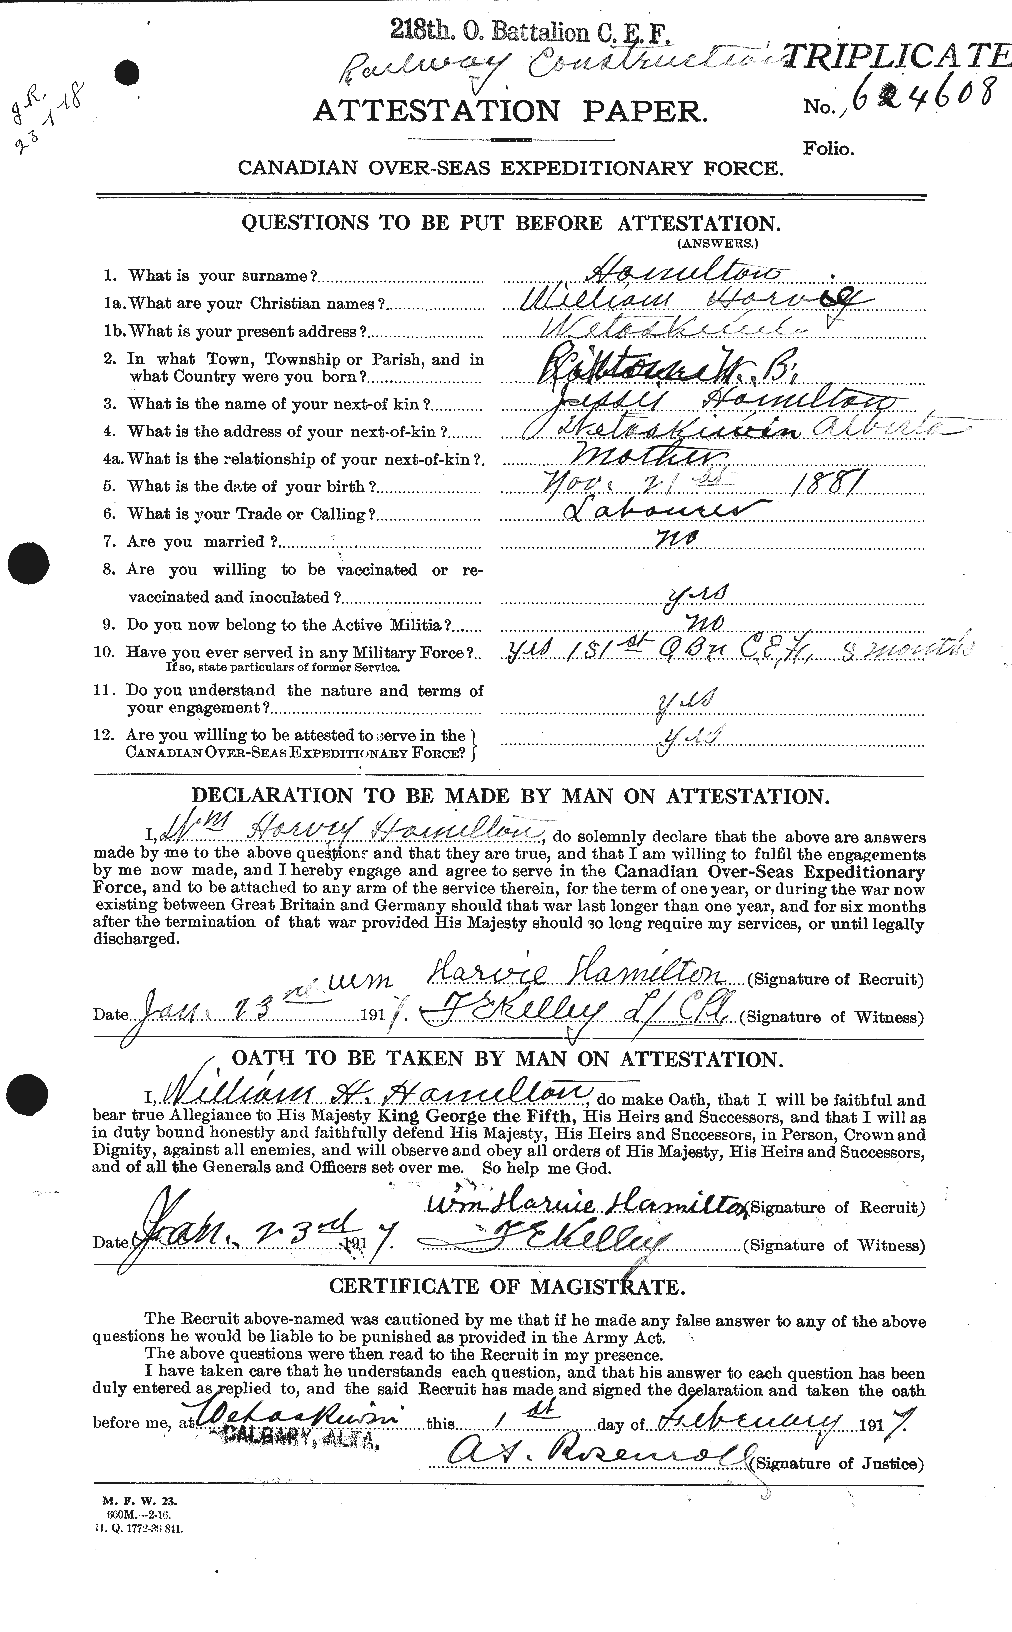 Personnel Records of the First World War - CEF 374897a